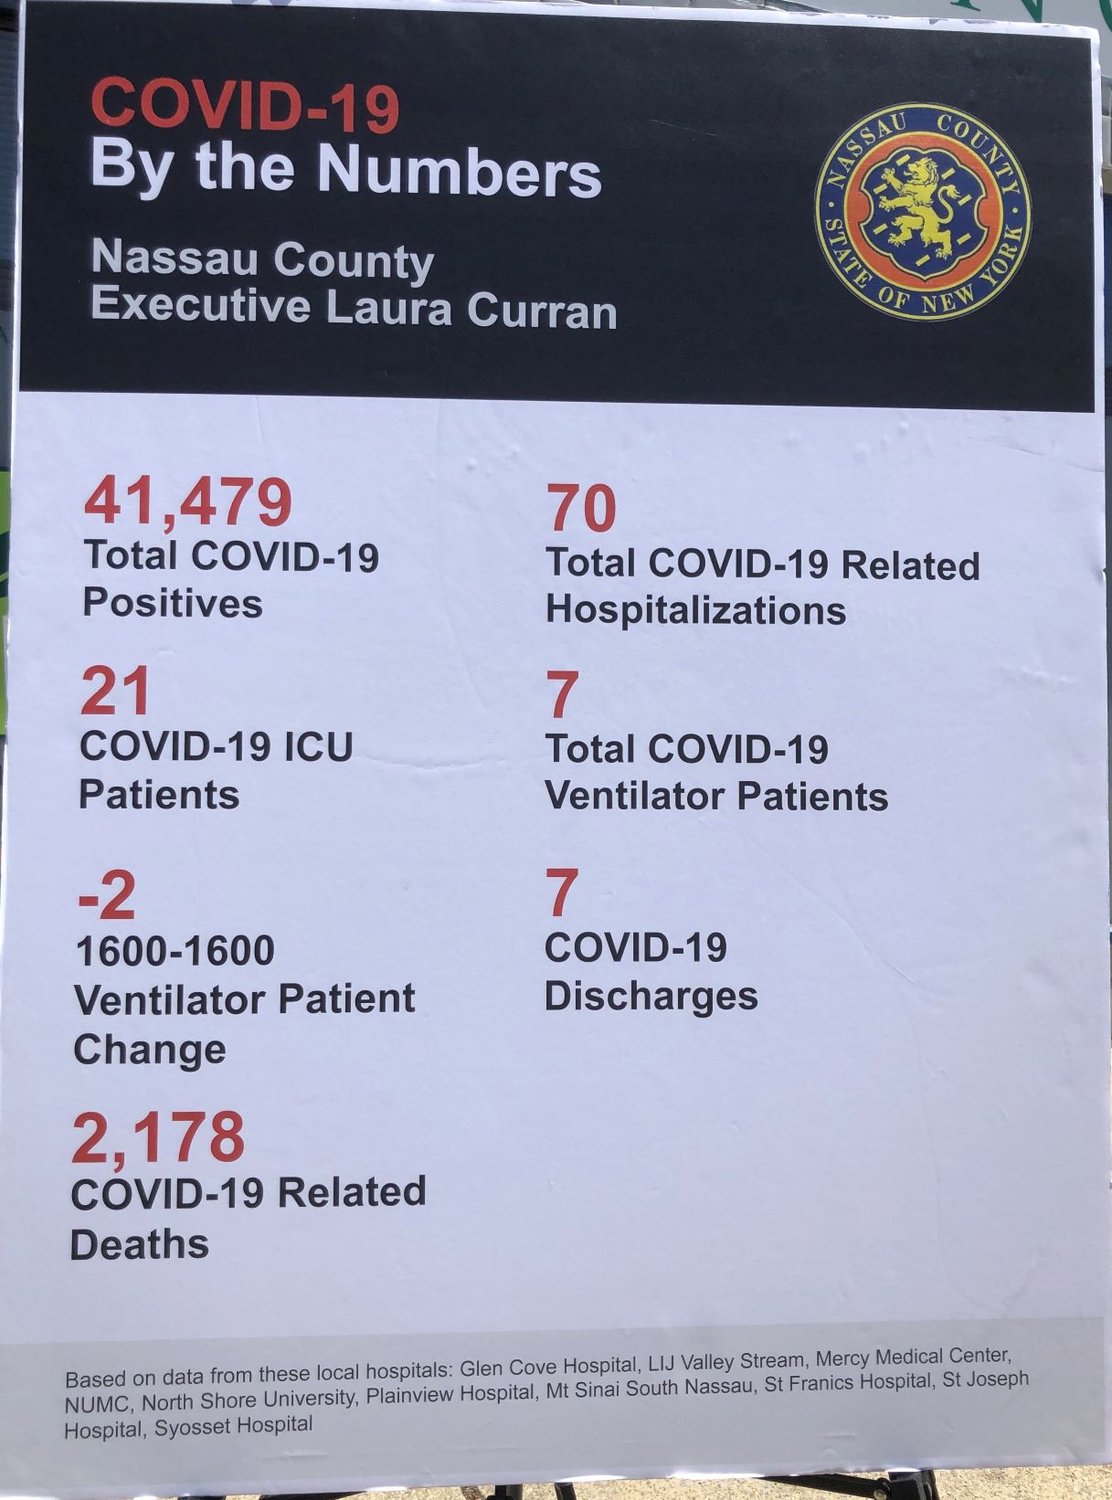 The Covid-19 numbers for Nassau County as of June 22.